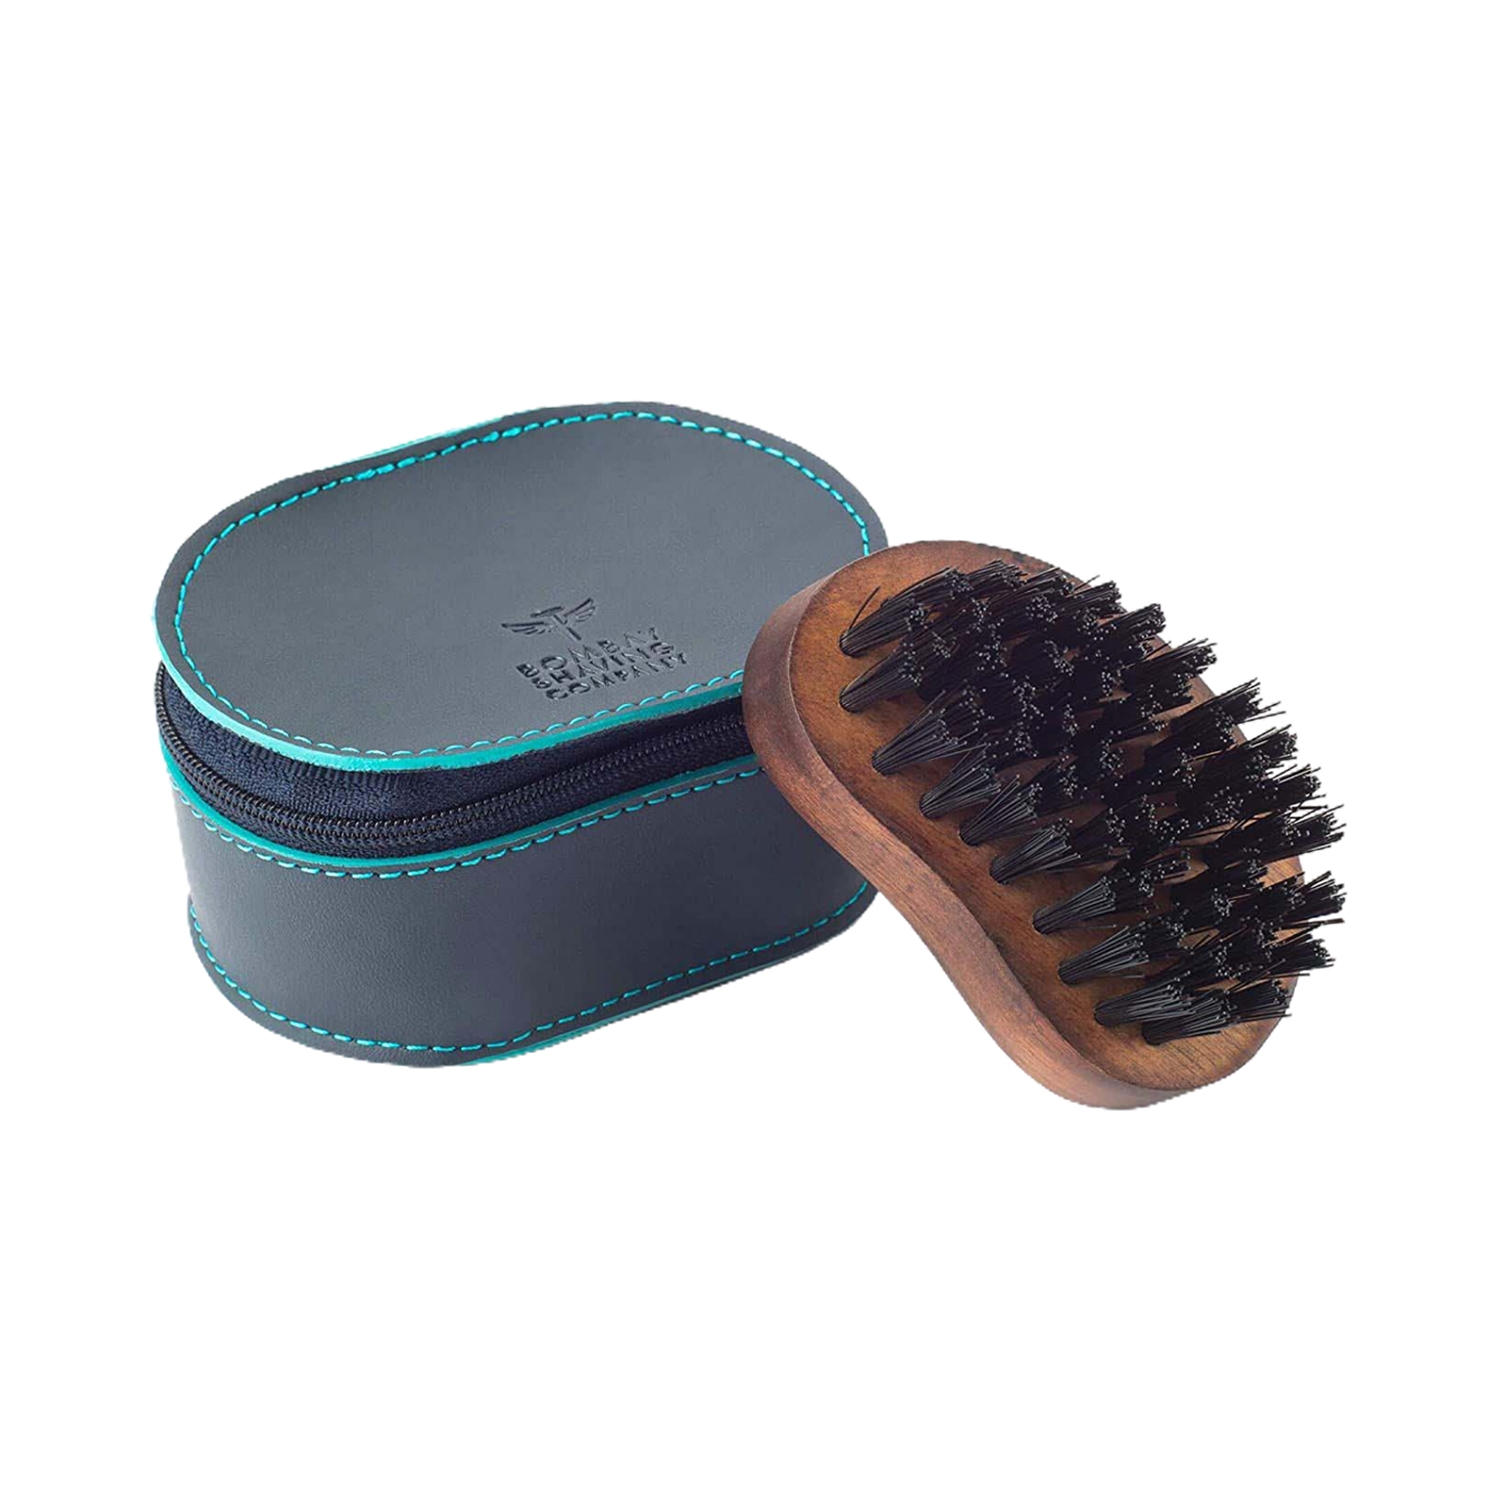 Bombay Shaving Company | Bombay Shaving Company Pocket Size Beard Brush with Faux Leather Pouch